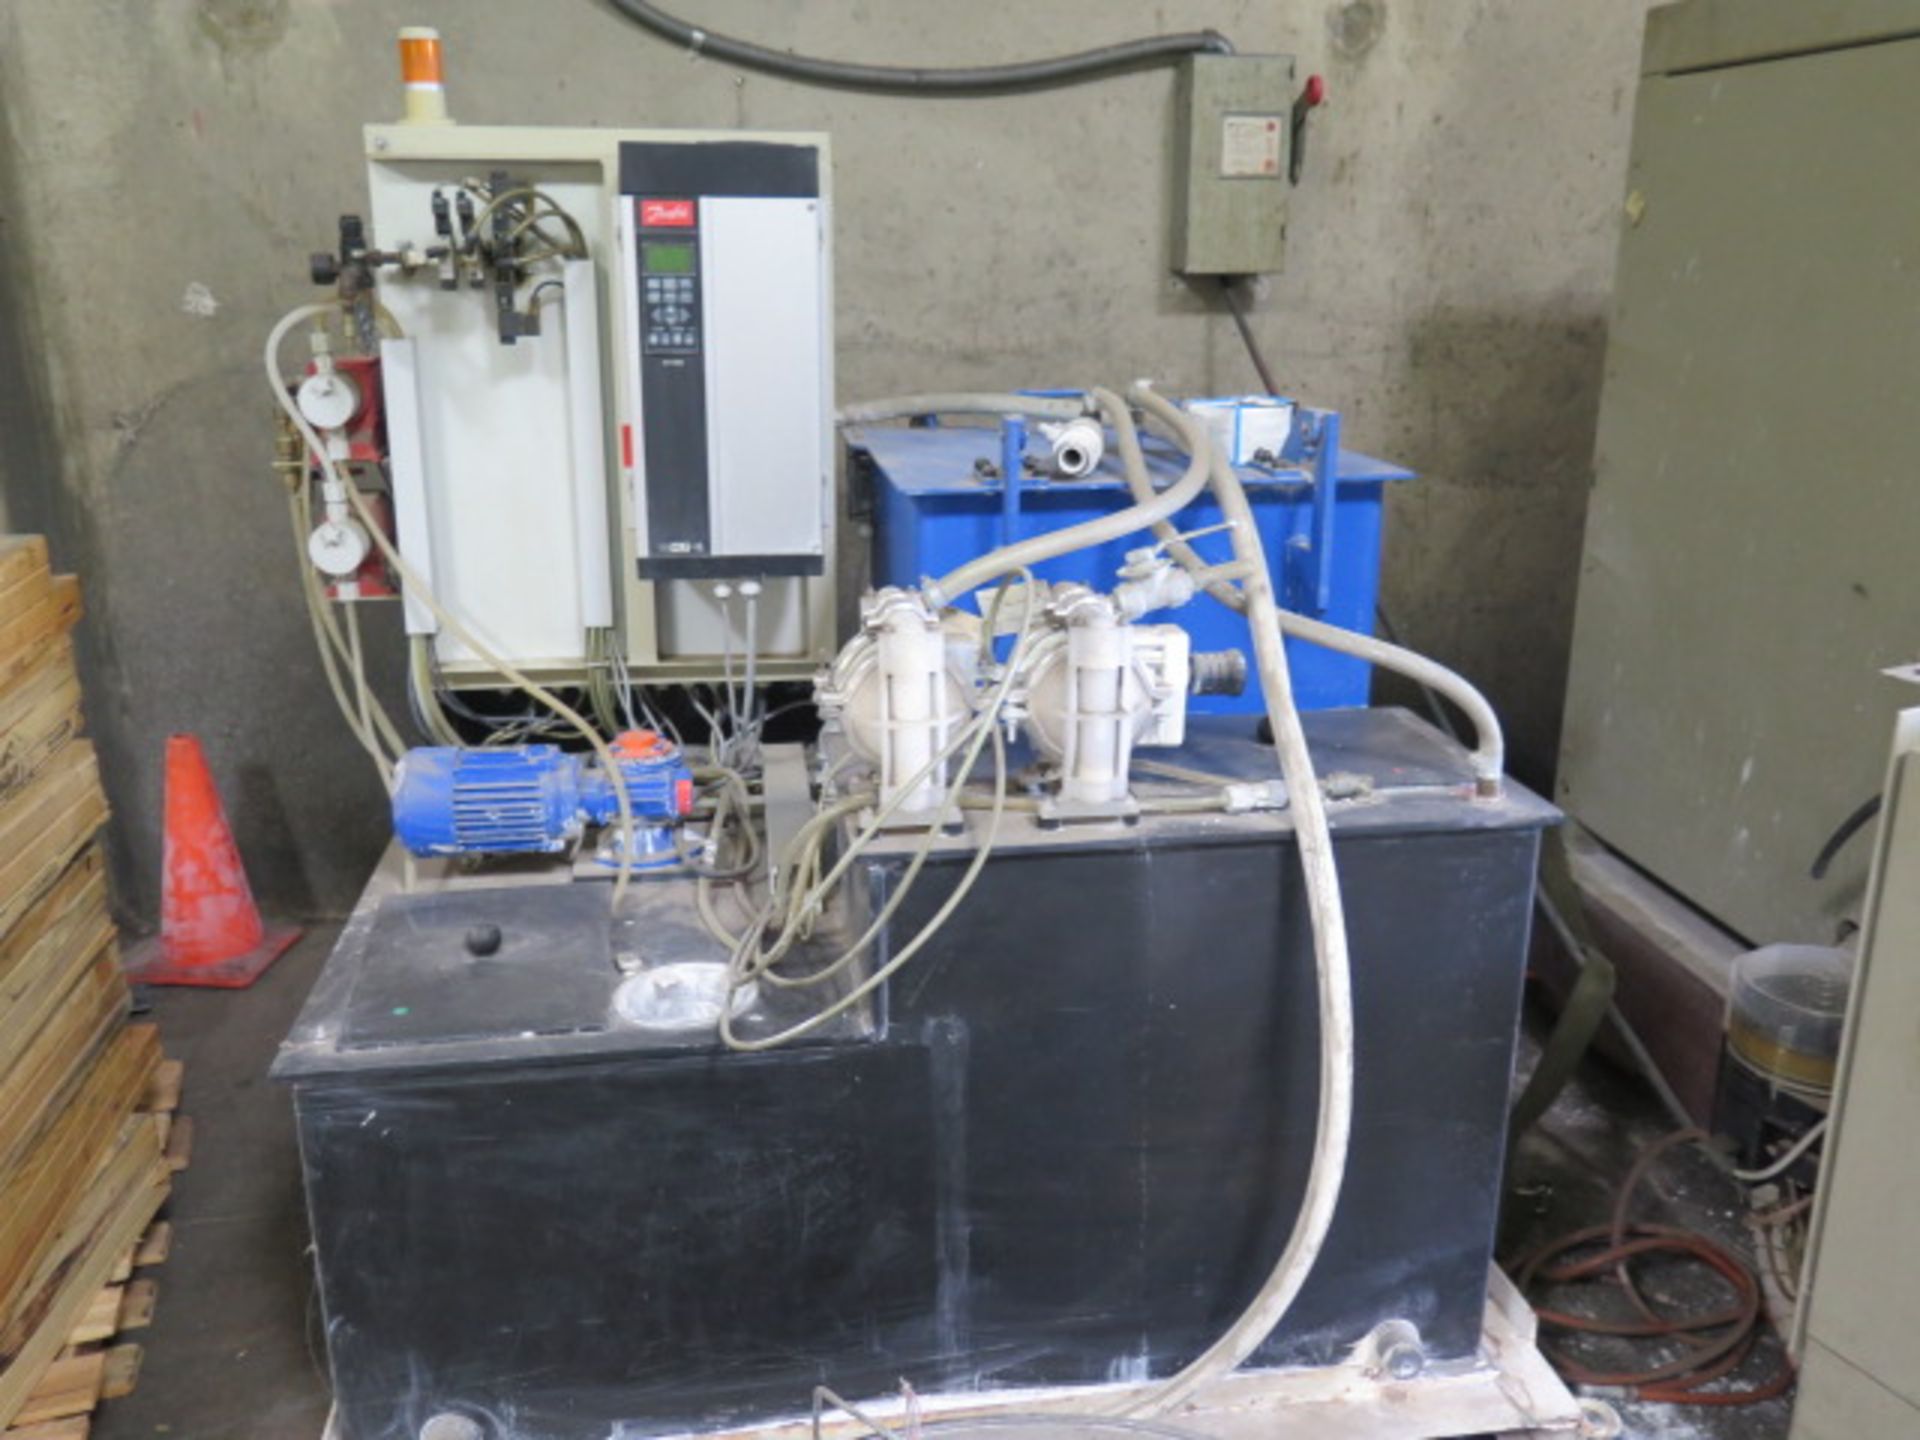 Almco V-17 DTC Media Tumbler s/n 050106 w/ Almco Controls, Slurry Dispenser, SOLD AS IS - Image 6 of 15